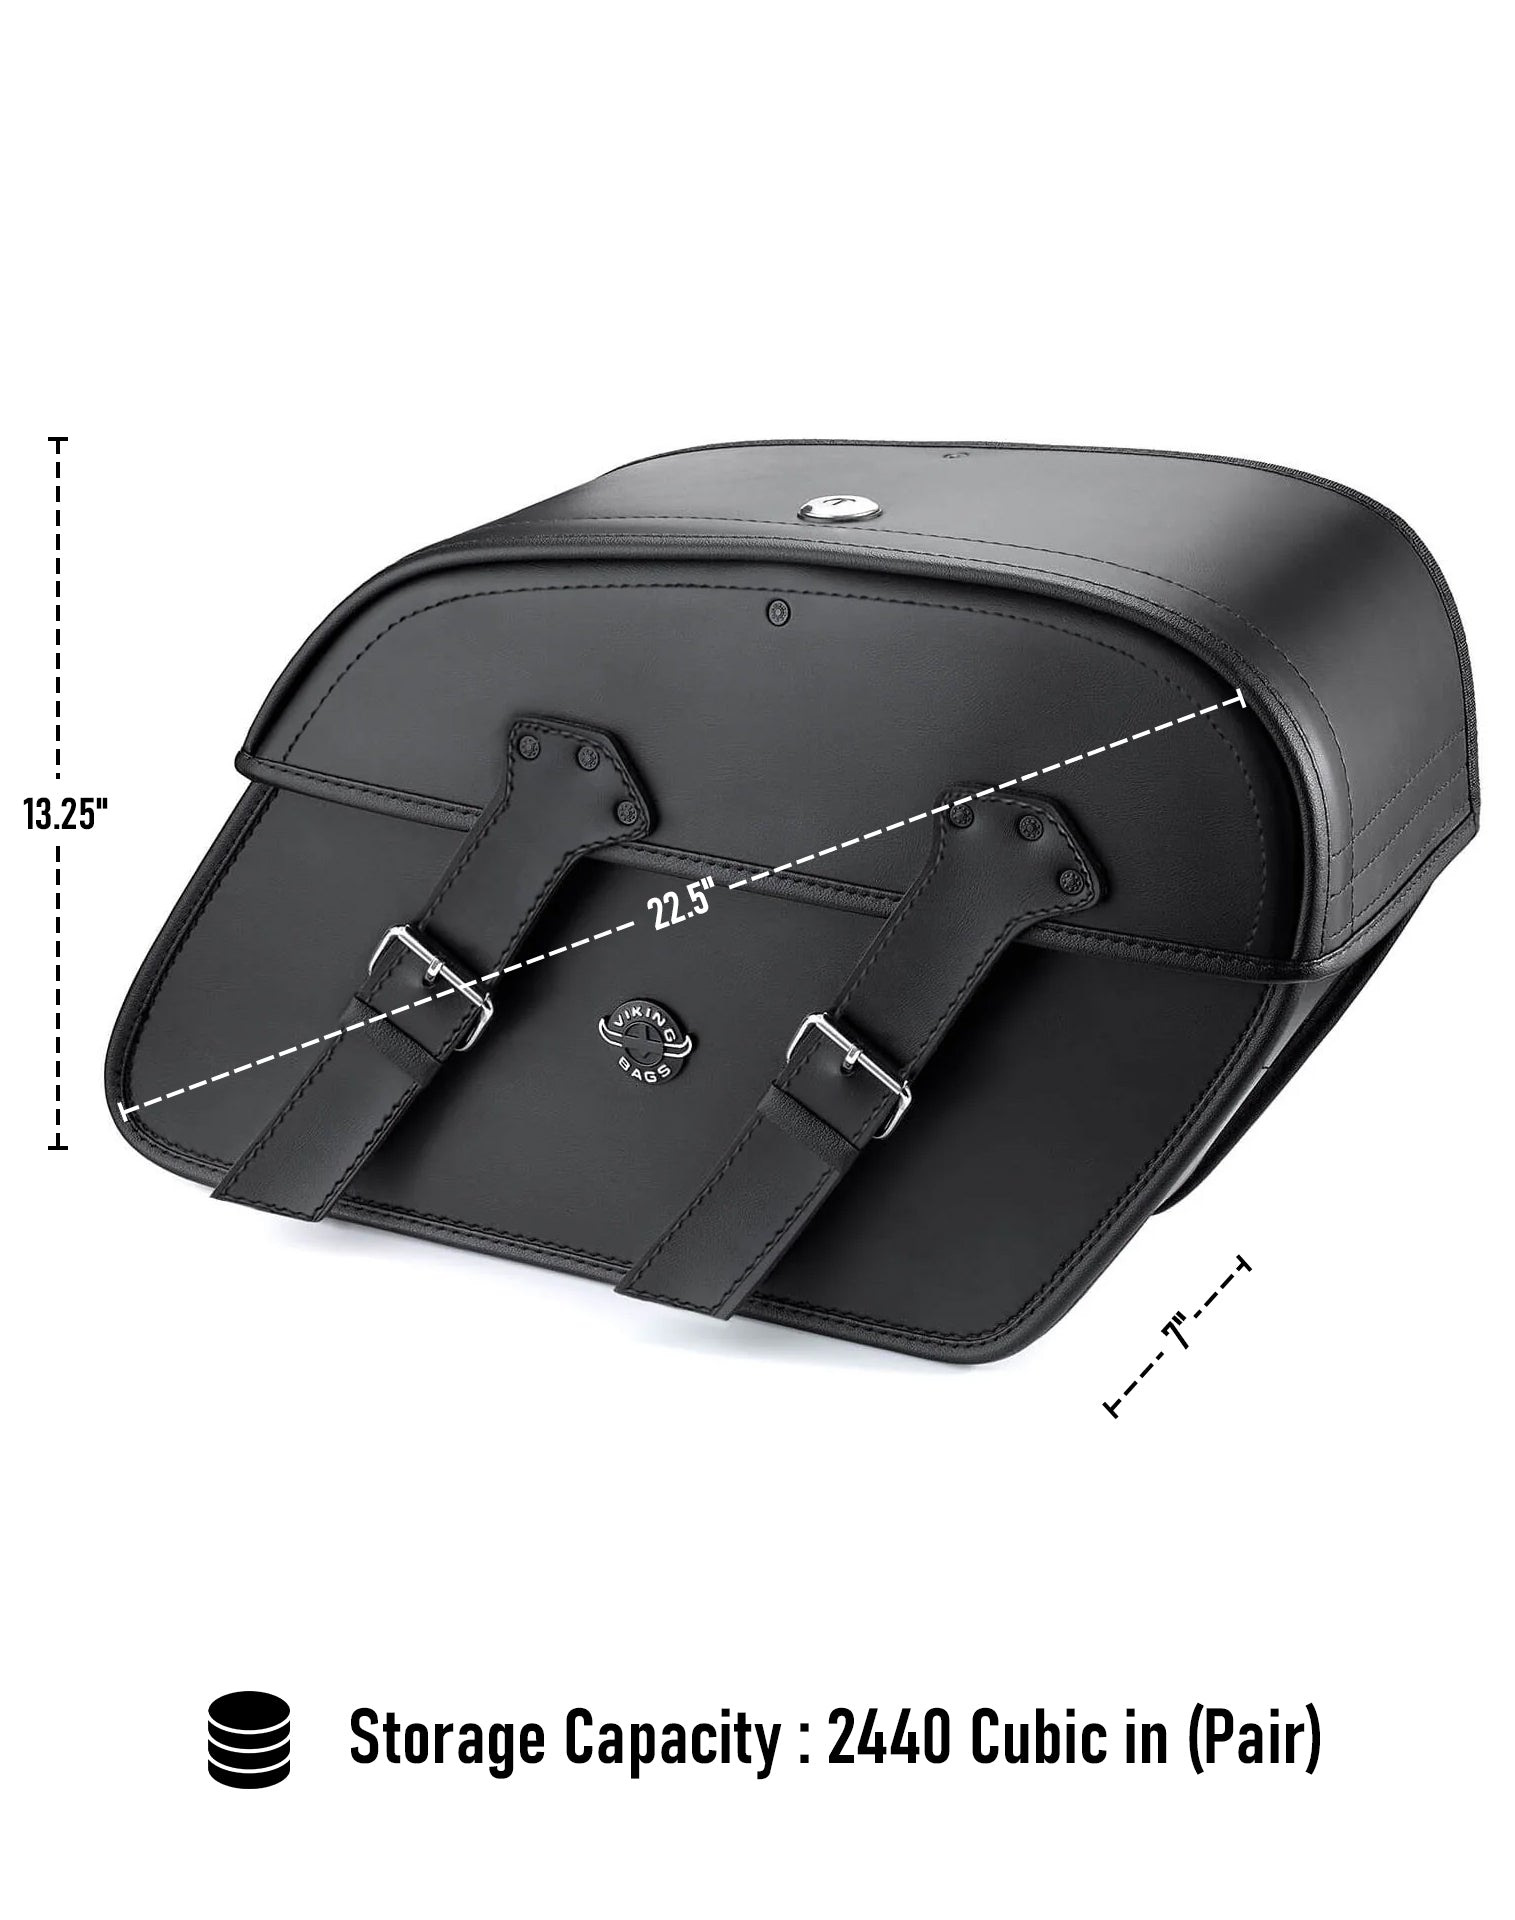 Viking Raven Extra Large Suzuki Boulevard C90 Vl1500 Leather Motorcycle Saddlebags Can Store Your Ridings Gears